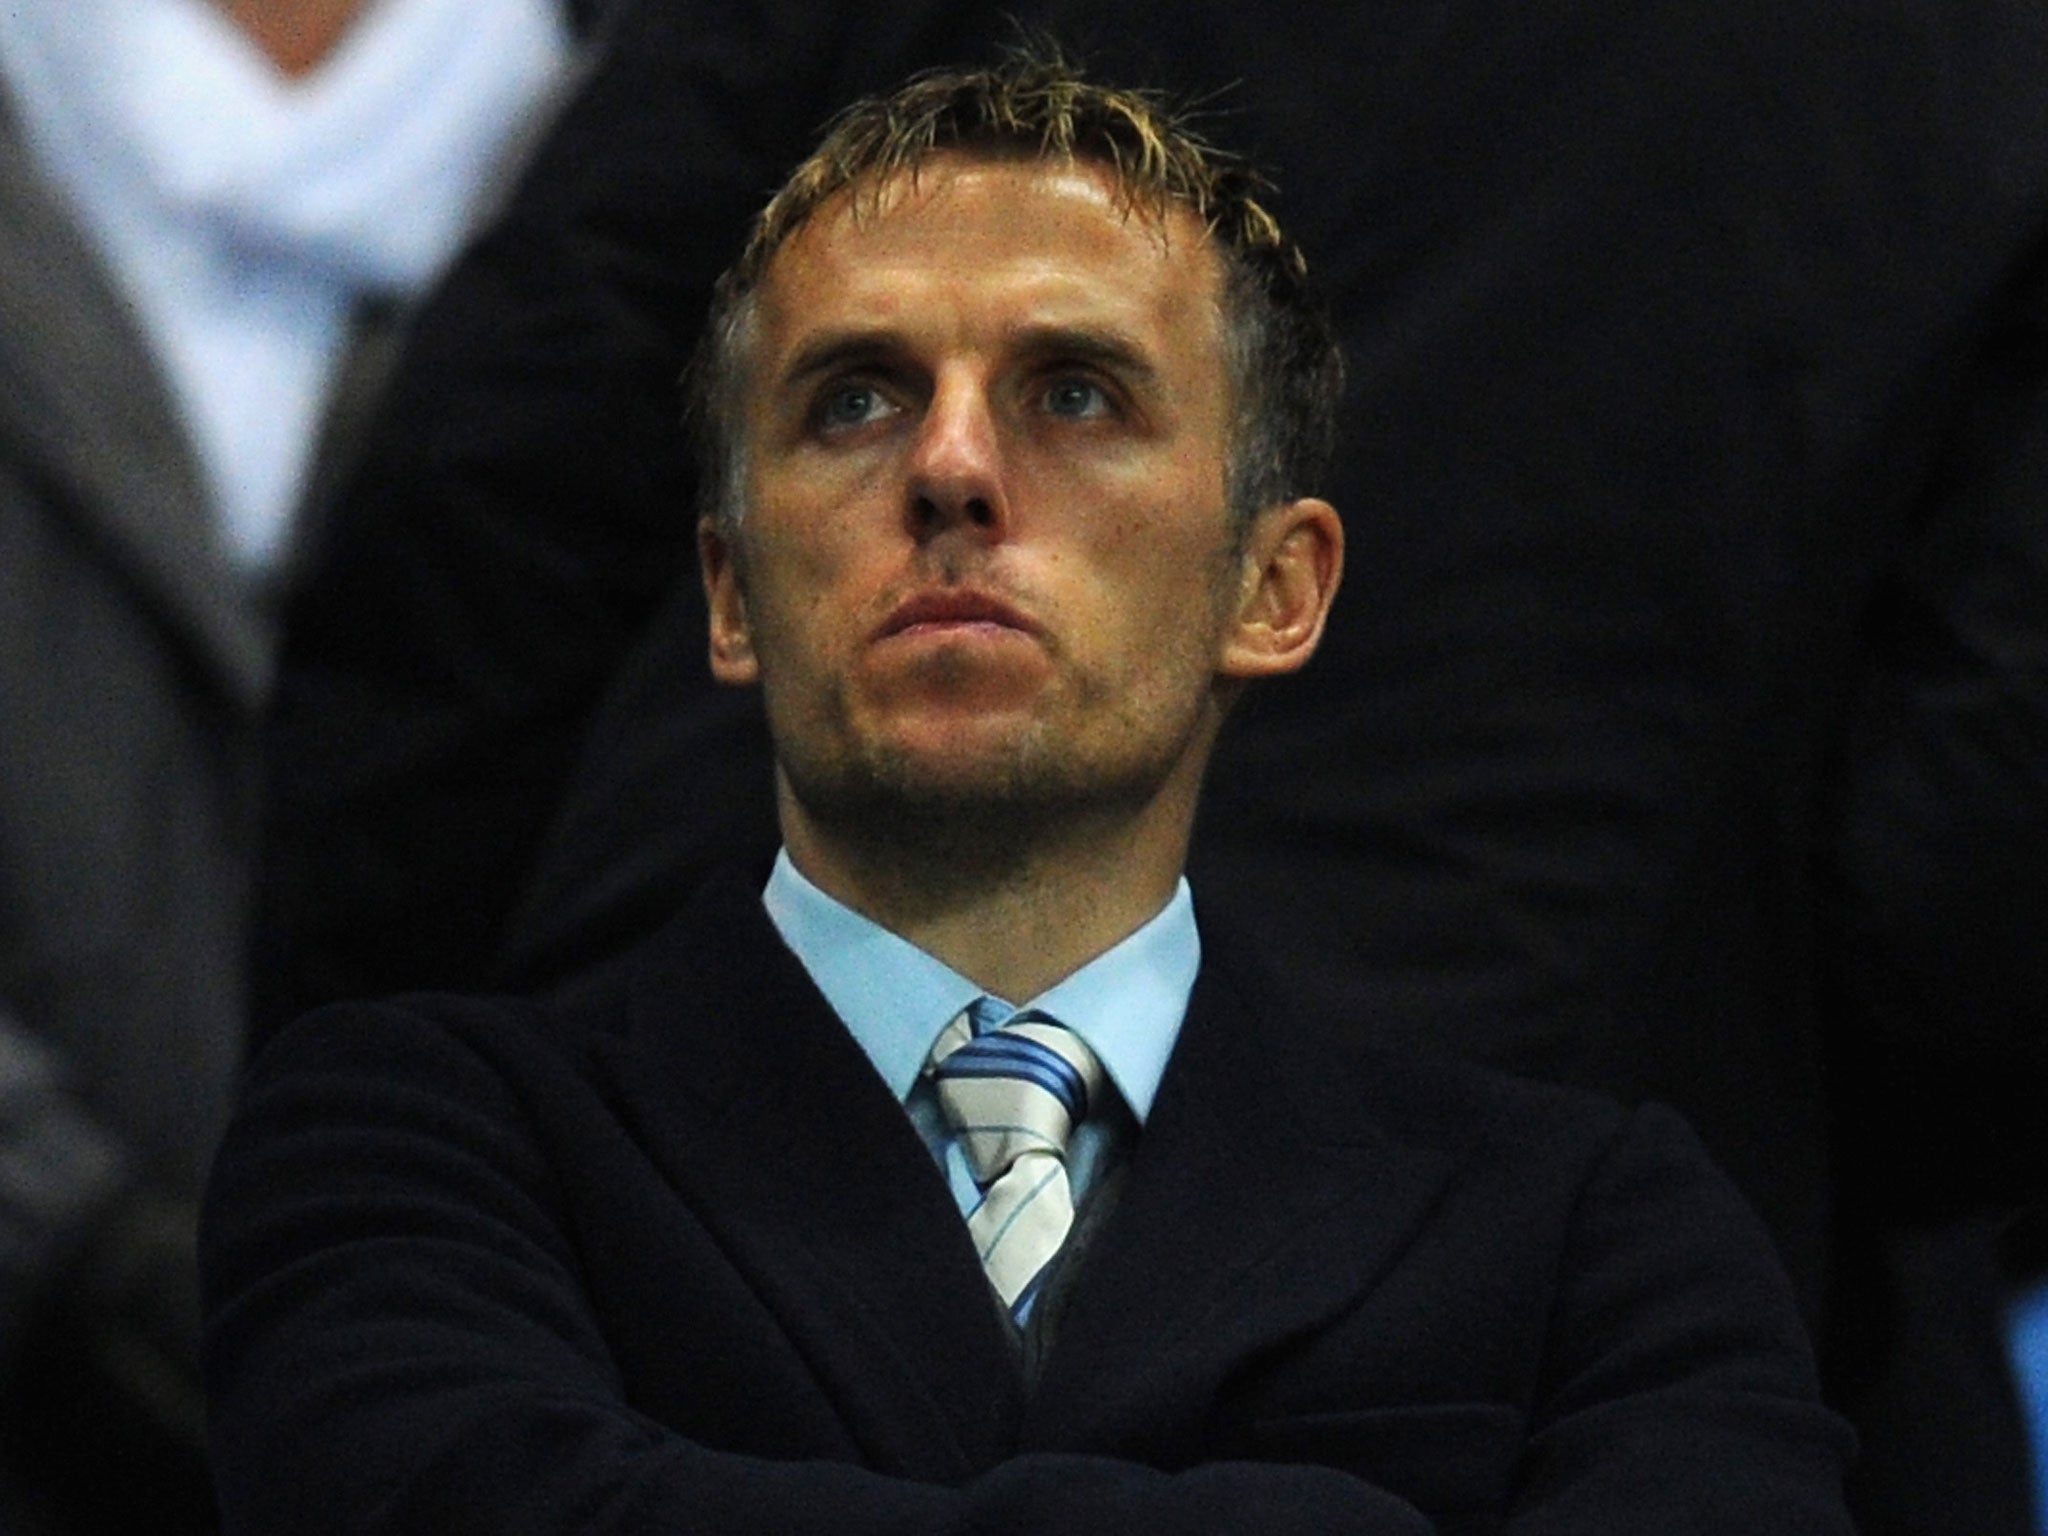 Phil Neville received a torrent of abuse on Twitter after his BBC commentating debut